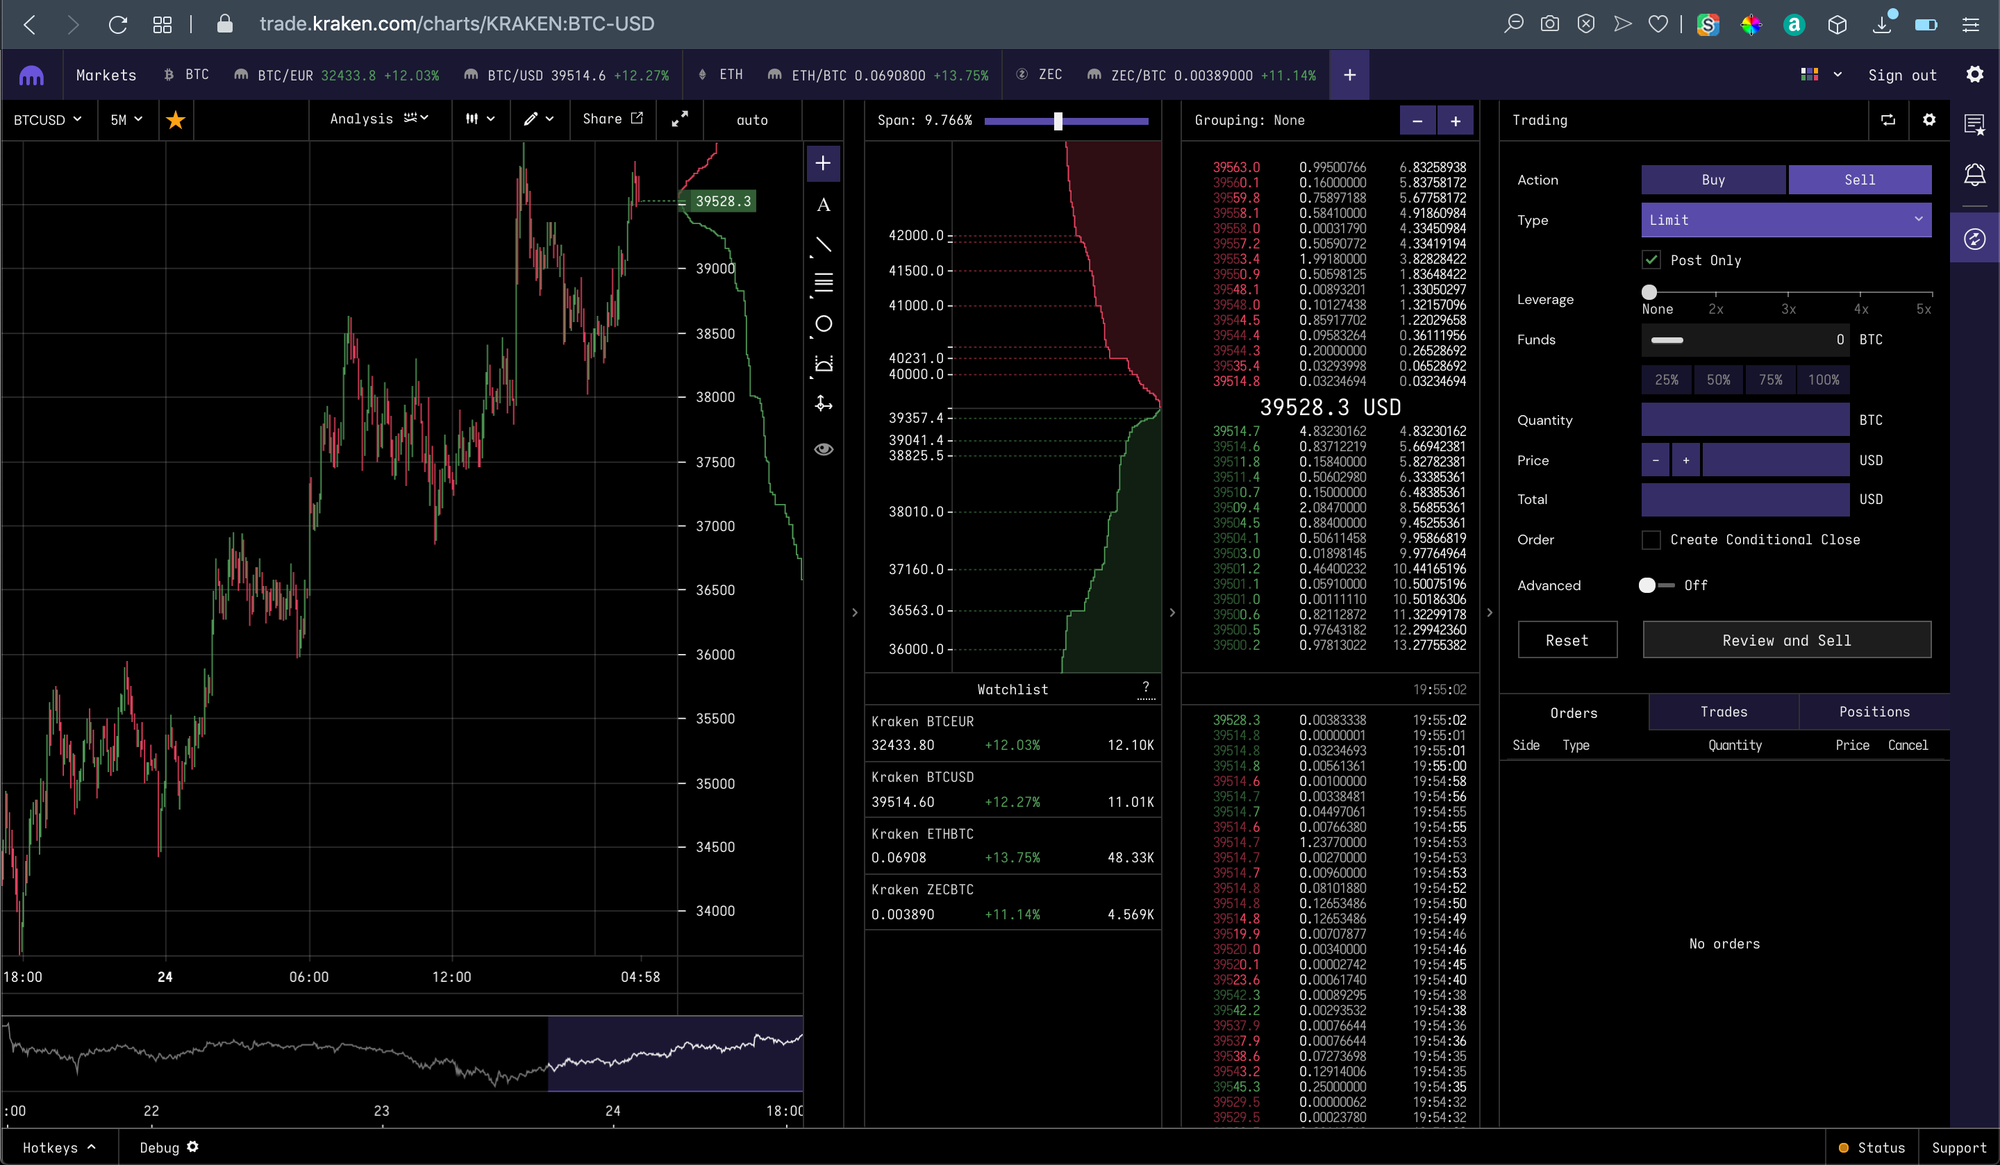 Kraken trading app. Notice the vertical volume chart. Zoom out beyond the default 1% to see trends - where people are placing longer term buy/sell orders. Here, you can see the sell orders for BTC are pretty close to the current price. The buy orders are much farther below the current price. So, probably good to wait until the price comes down a bit and the volumes equalize. This does not account for traders on other platforms, but it can give you a valuable rough idea of what your fellow peers think about the current price point.